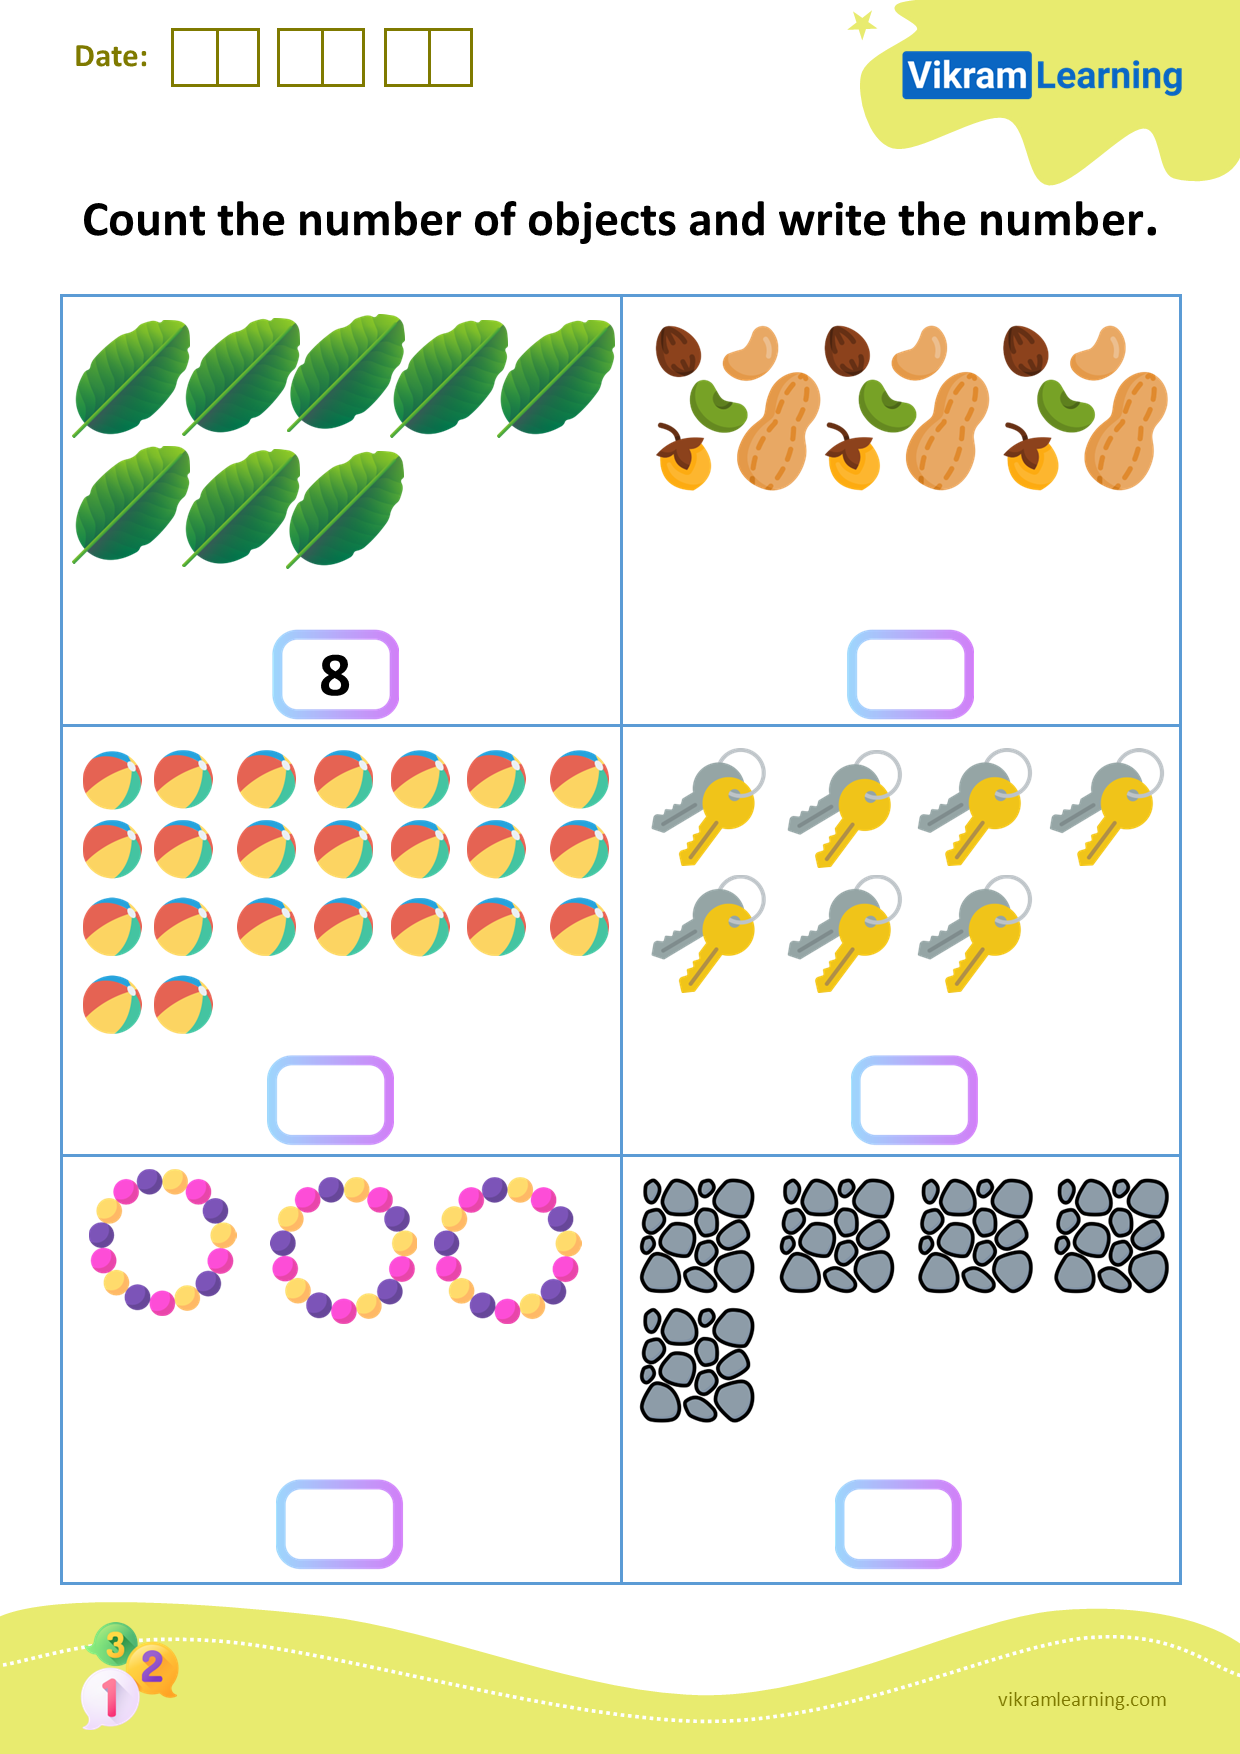 Download count the number of objects and write the number worksheets